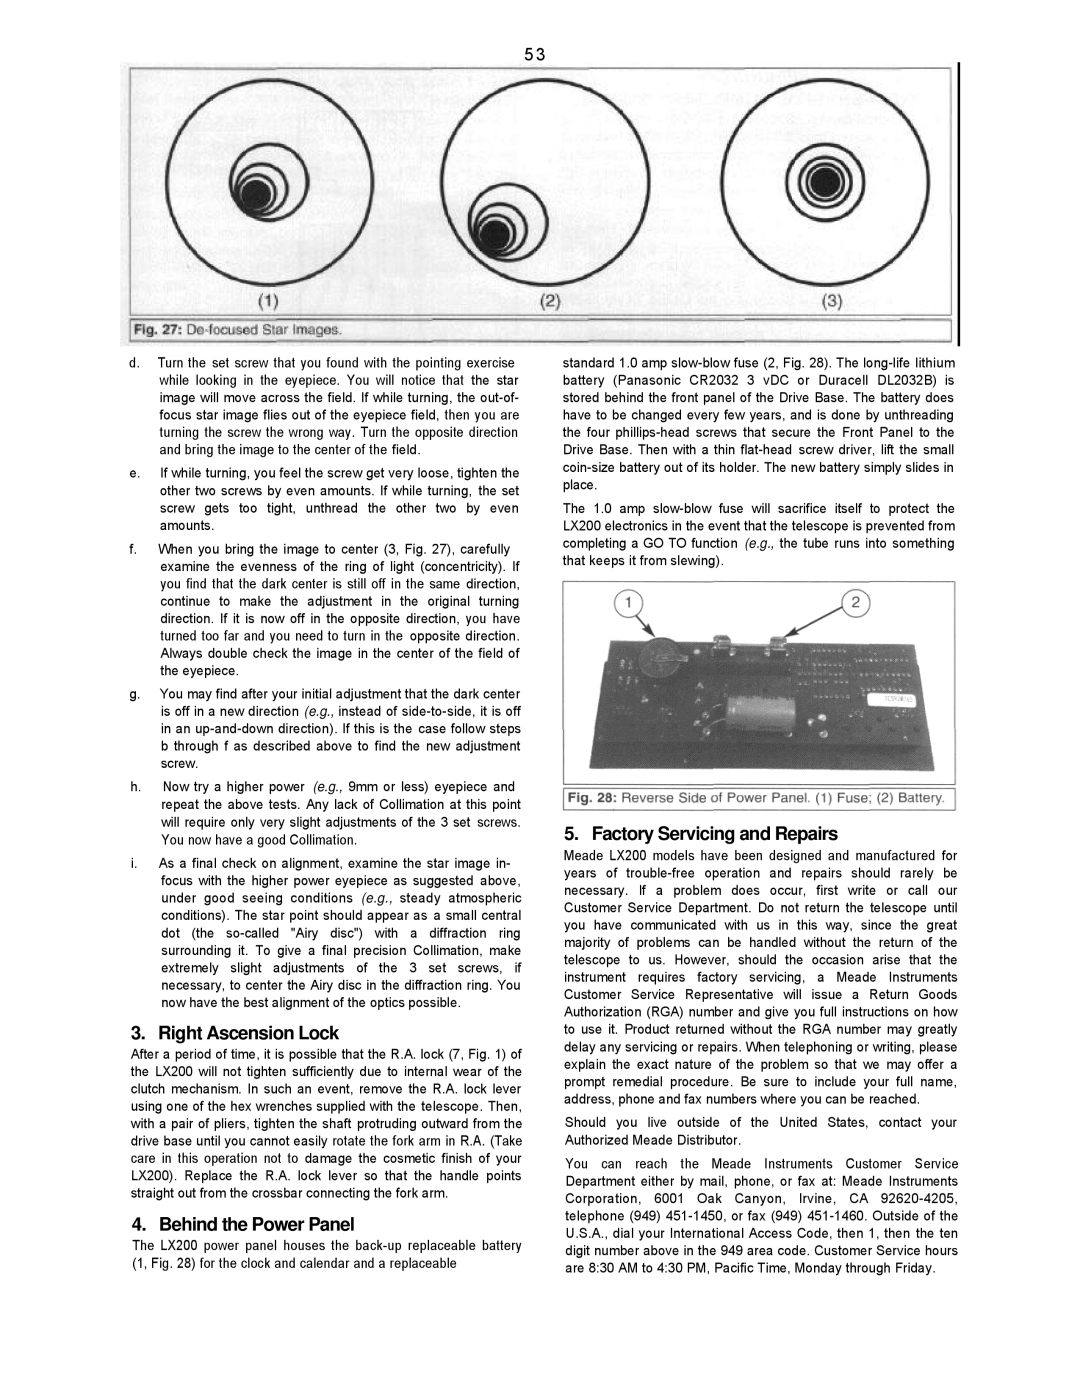 Leisure Time LX20 instruction manual Right Ascension Lock, Behind the Power Panel, Factory Servicing and Repairs 